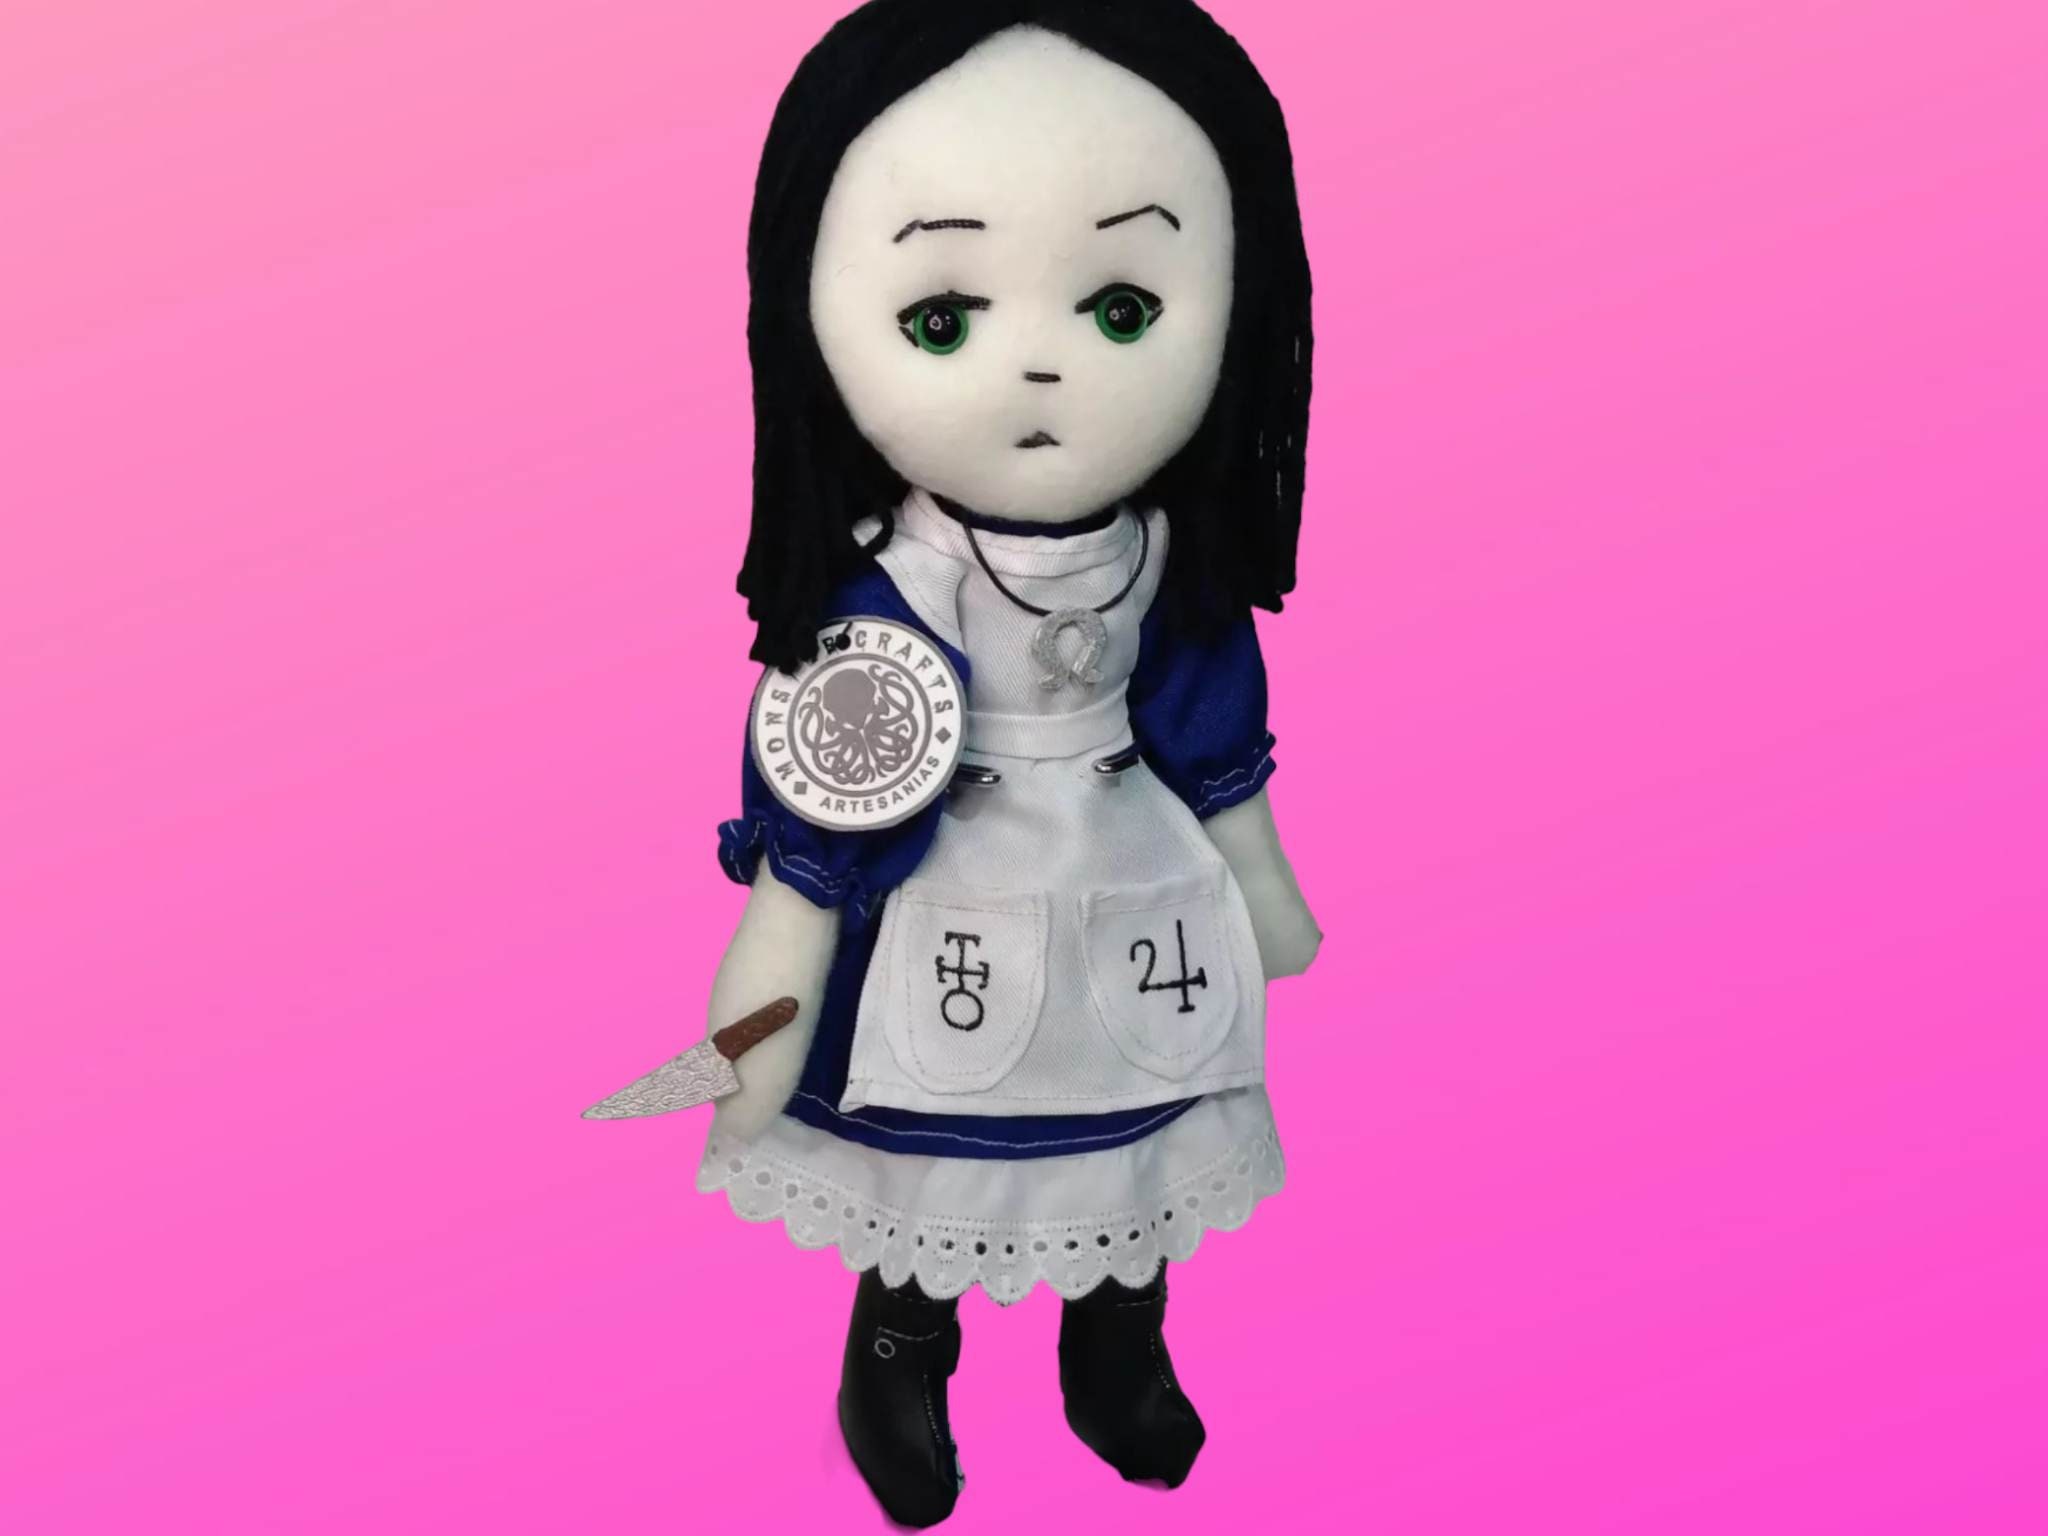 American Mcgee's Alice in Wonderland Inspired Doll Bendy 